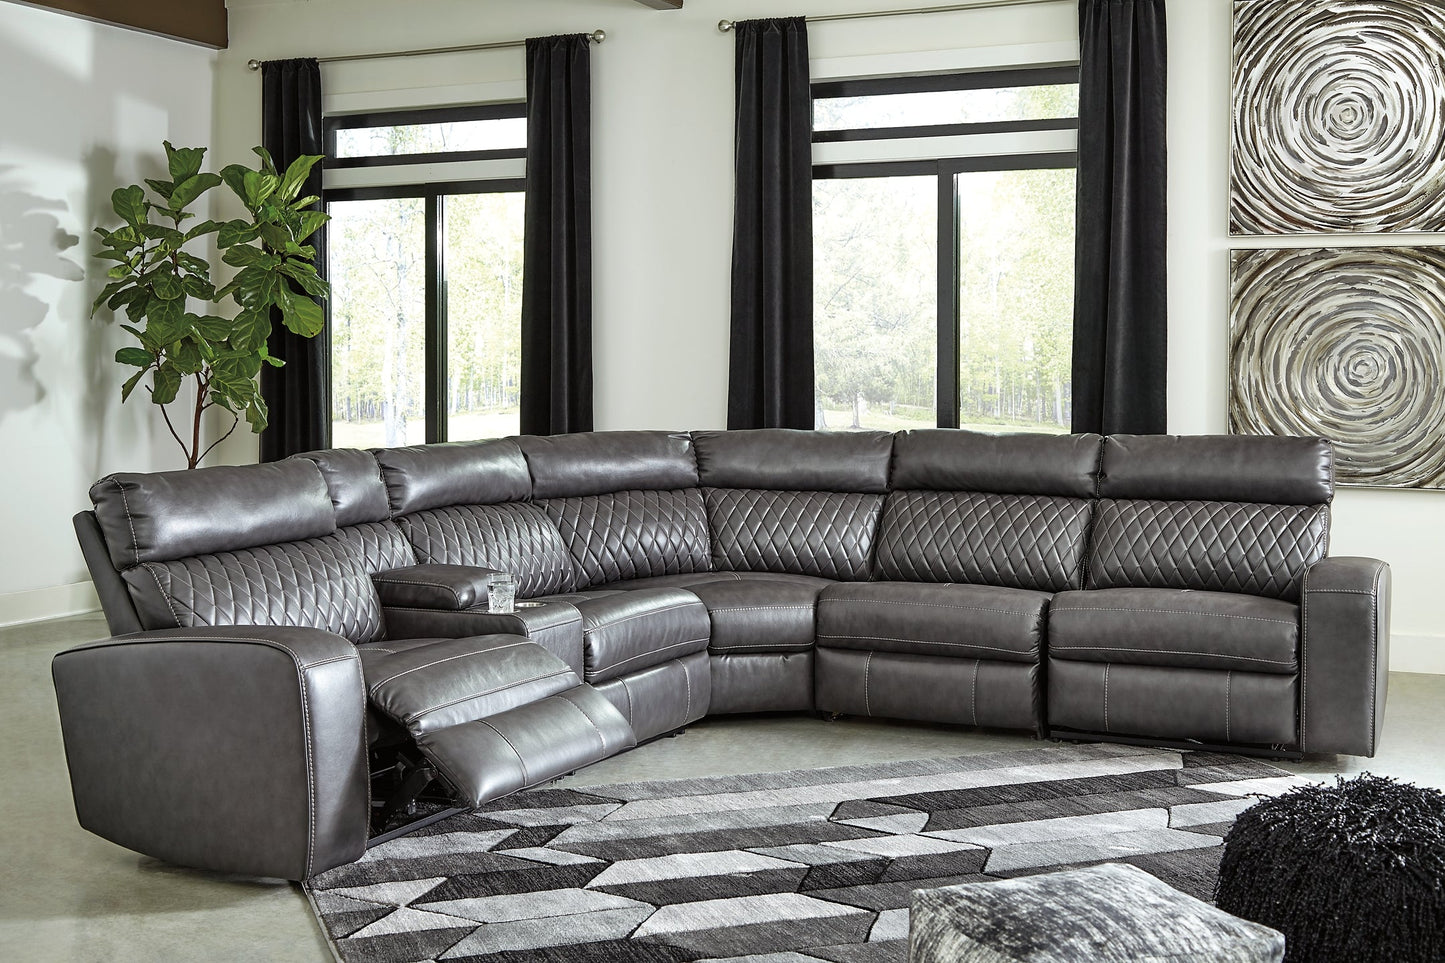 Samperstone 6-Piece Power Reclining Sectional Rent Wise Rent To Own Jacksonville, Florida